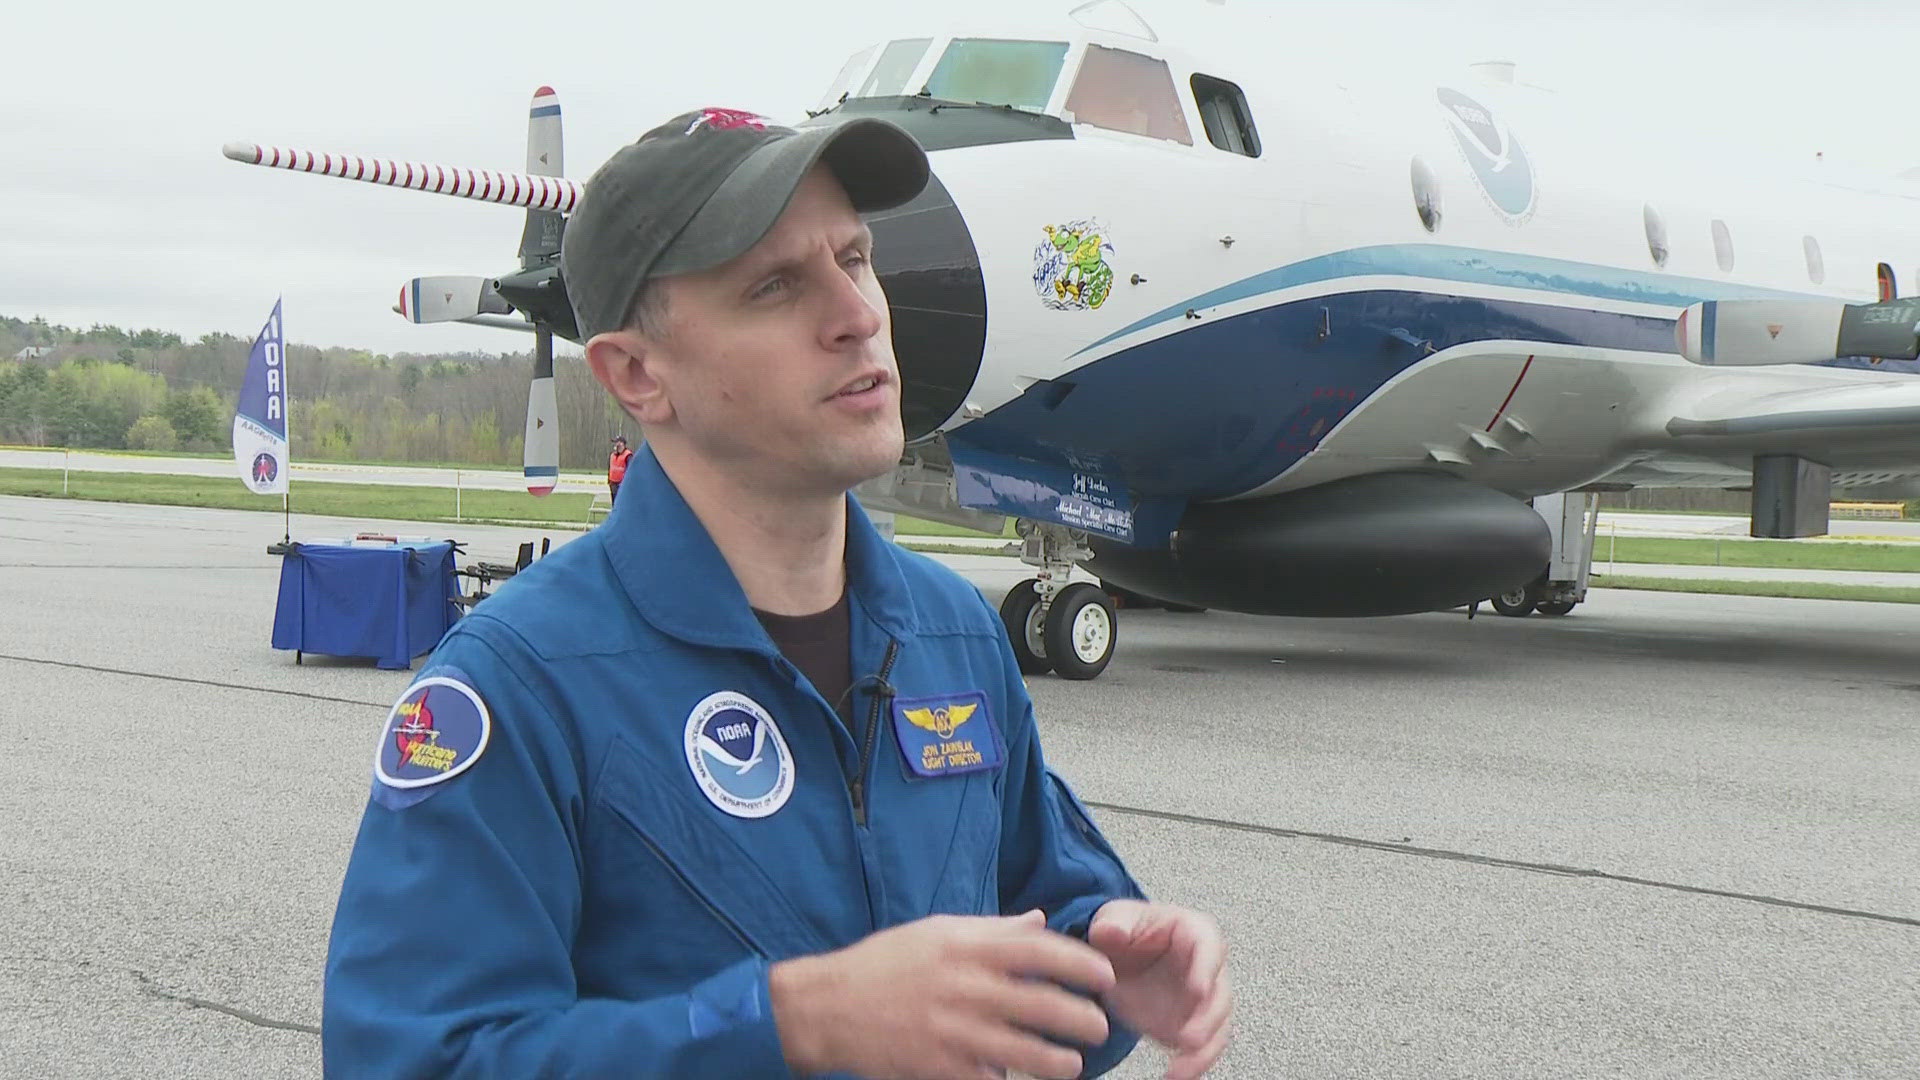 The National Oceanic and Atmospheric Administration (NOAA) Hurricane Awareness Tour educates Mainers about the state's risks.